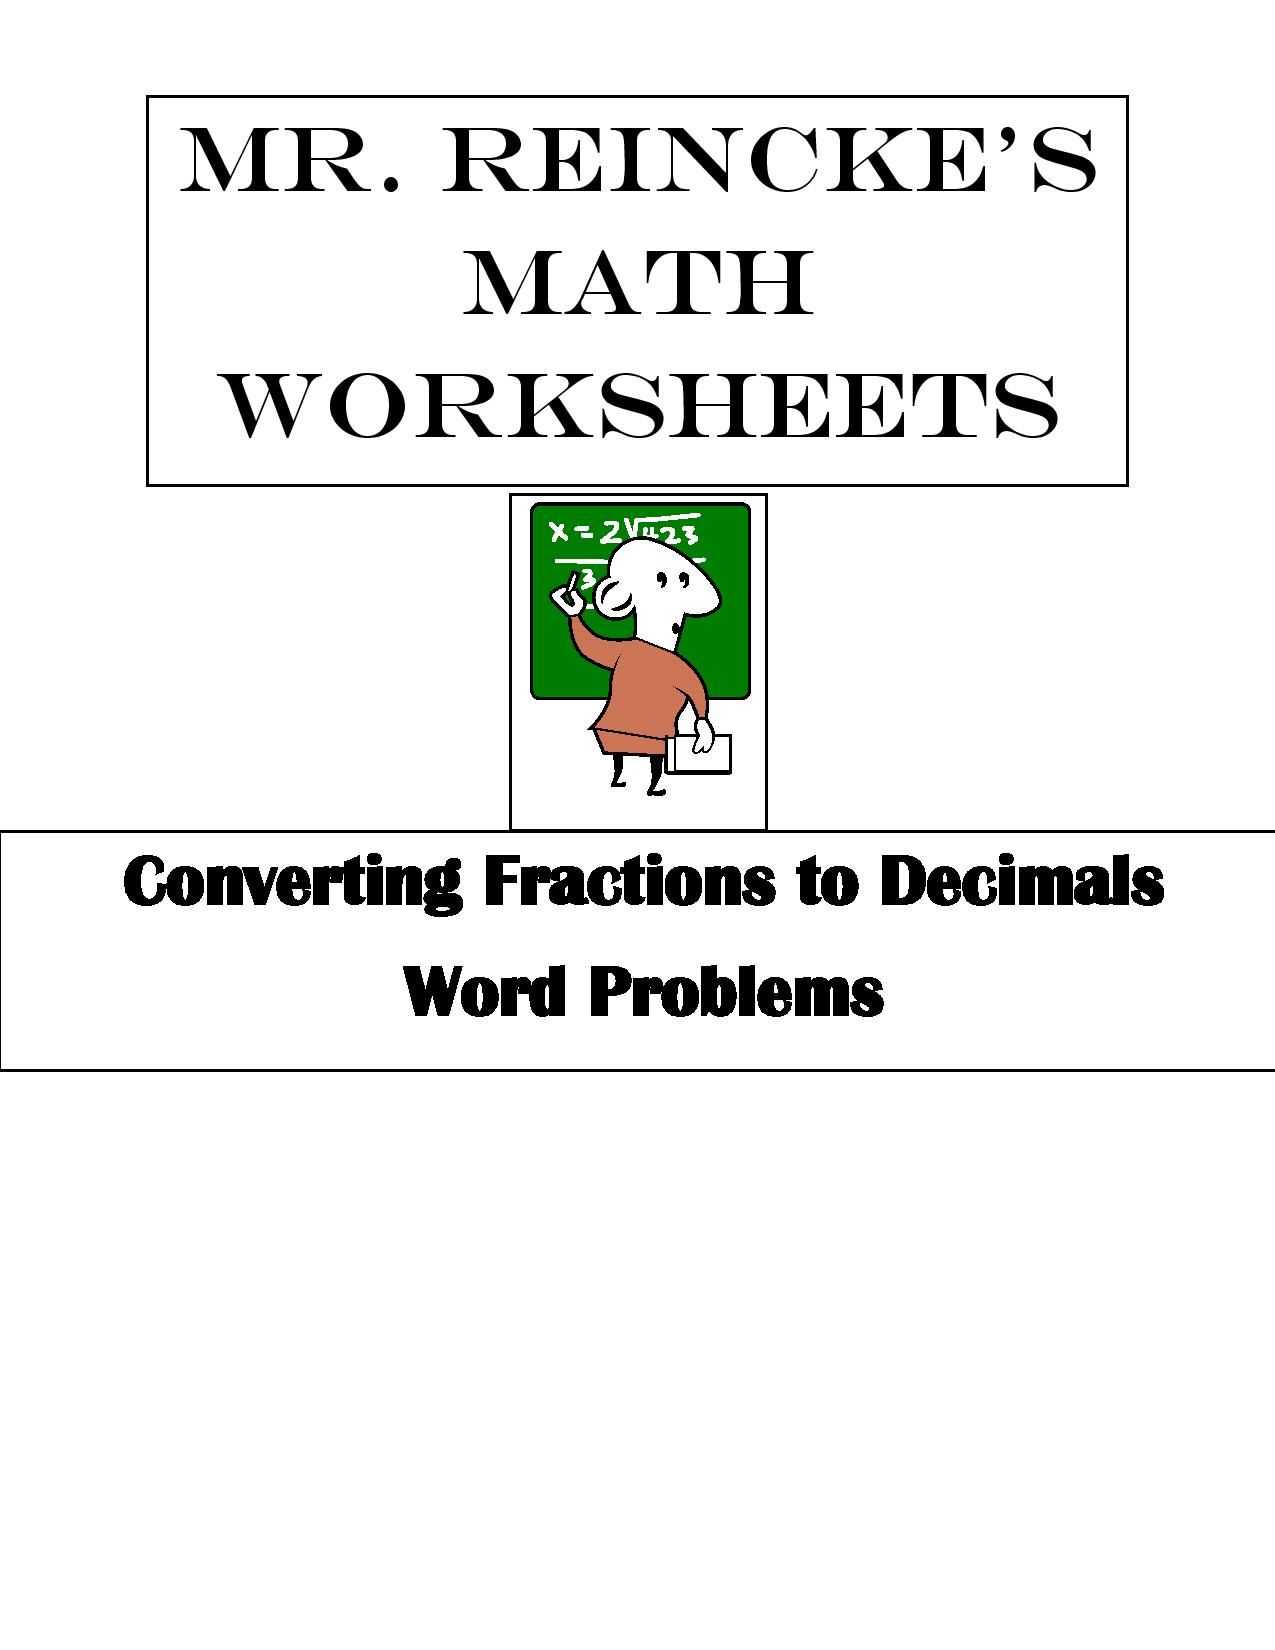 Equivalent Expressions Worksheet or Converting Fractions to Decimals Word Problems 4 Worksheets